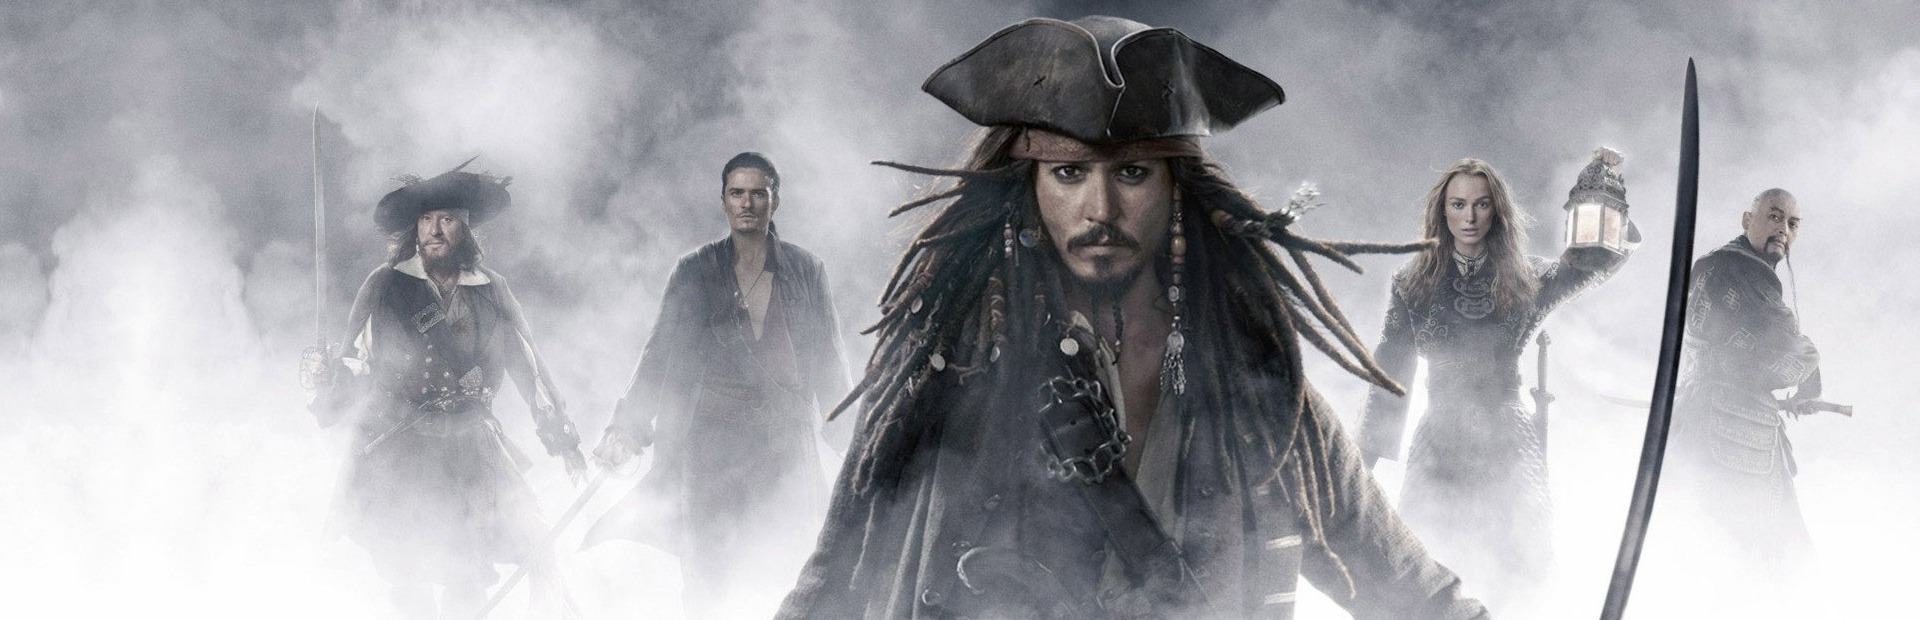 Pirates of The Caribbean: At World's End